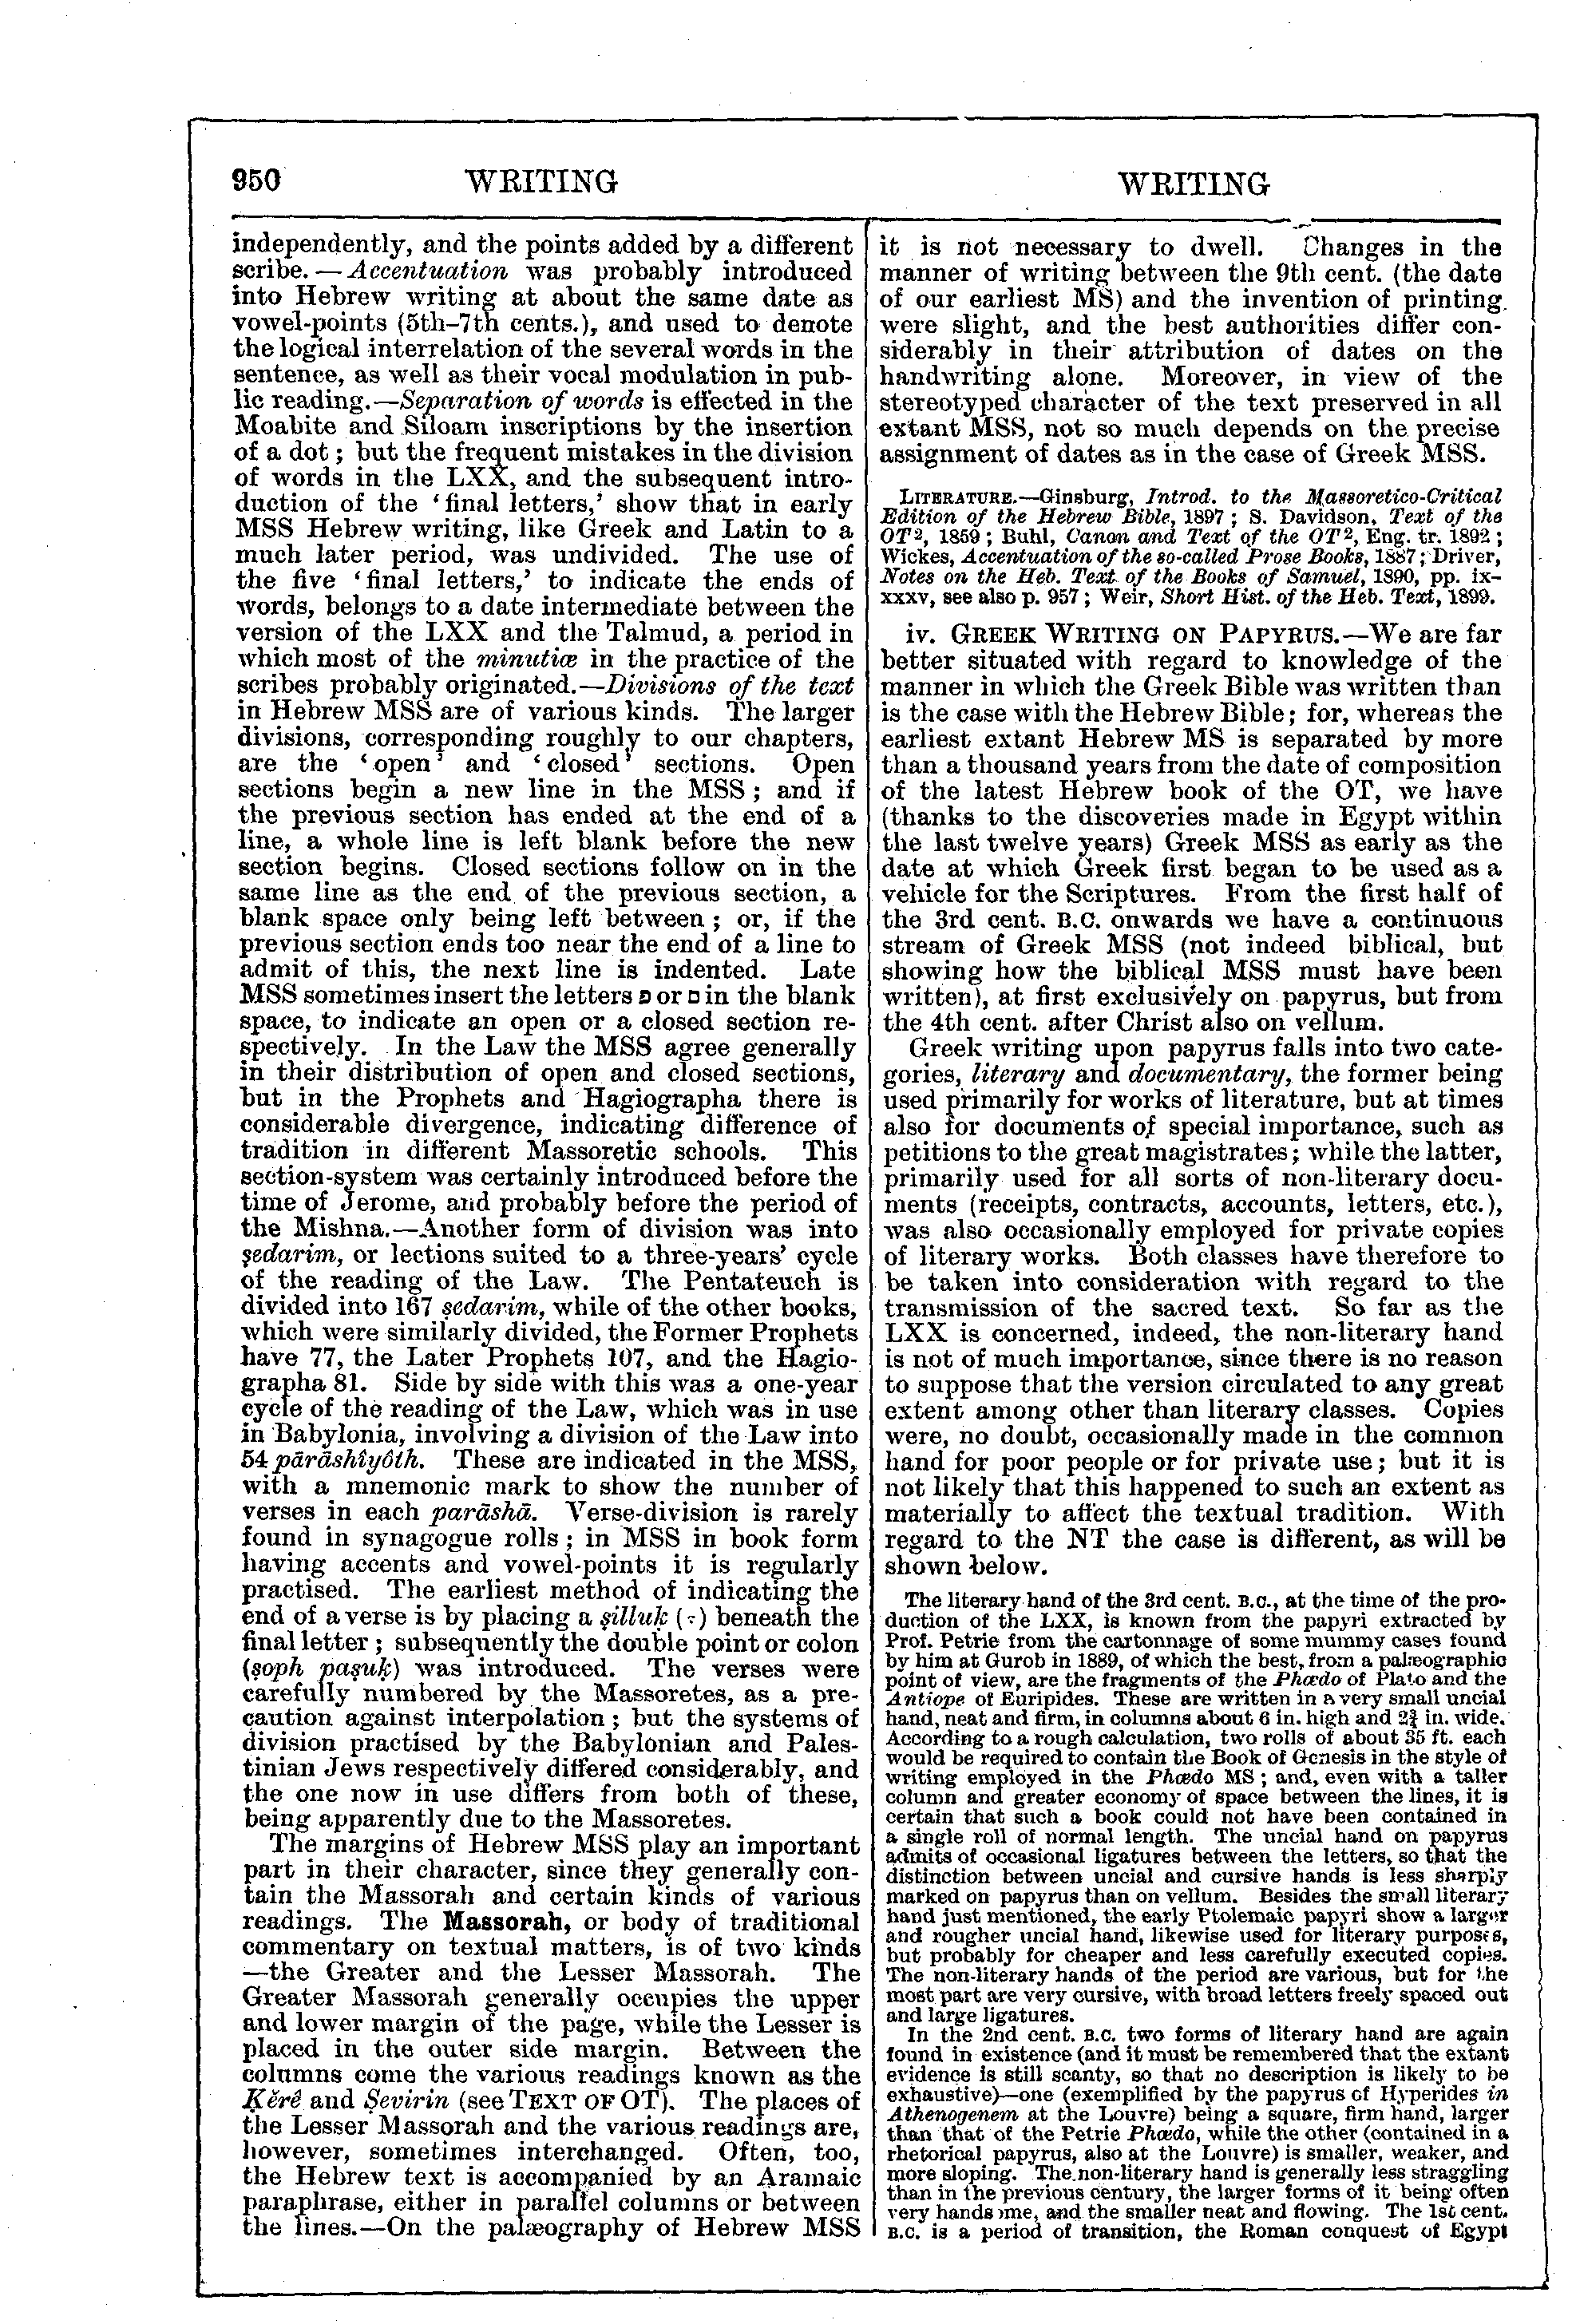 Image of page 950